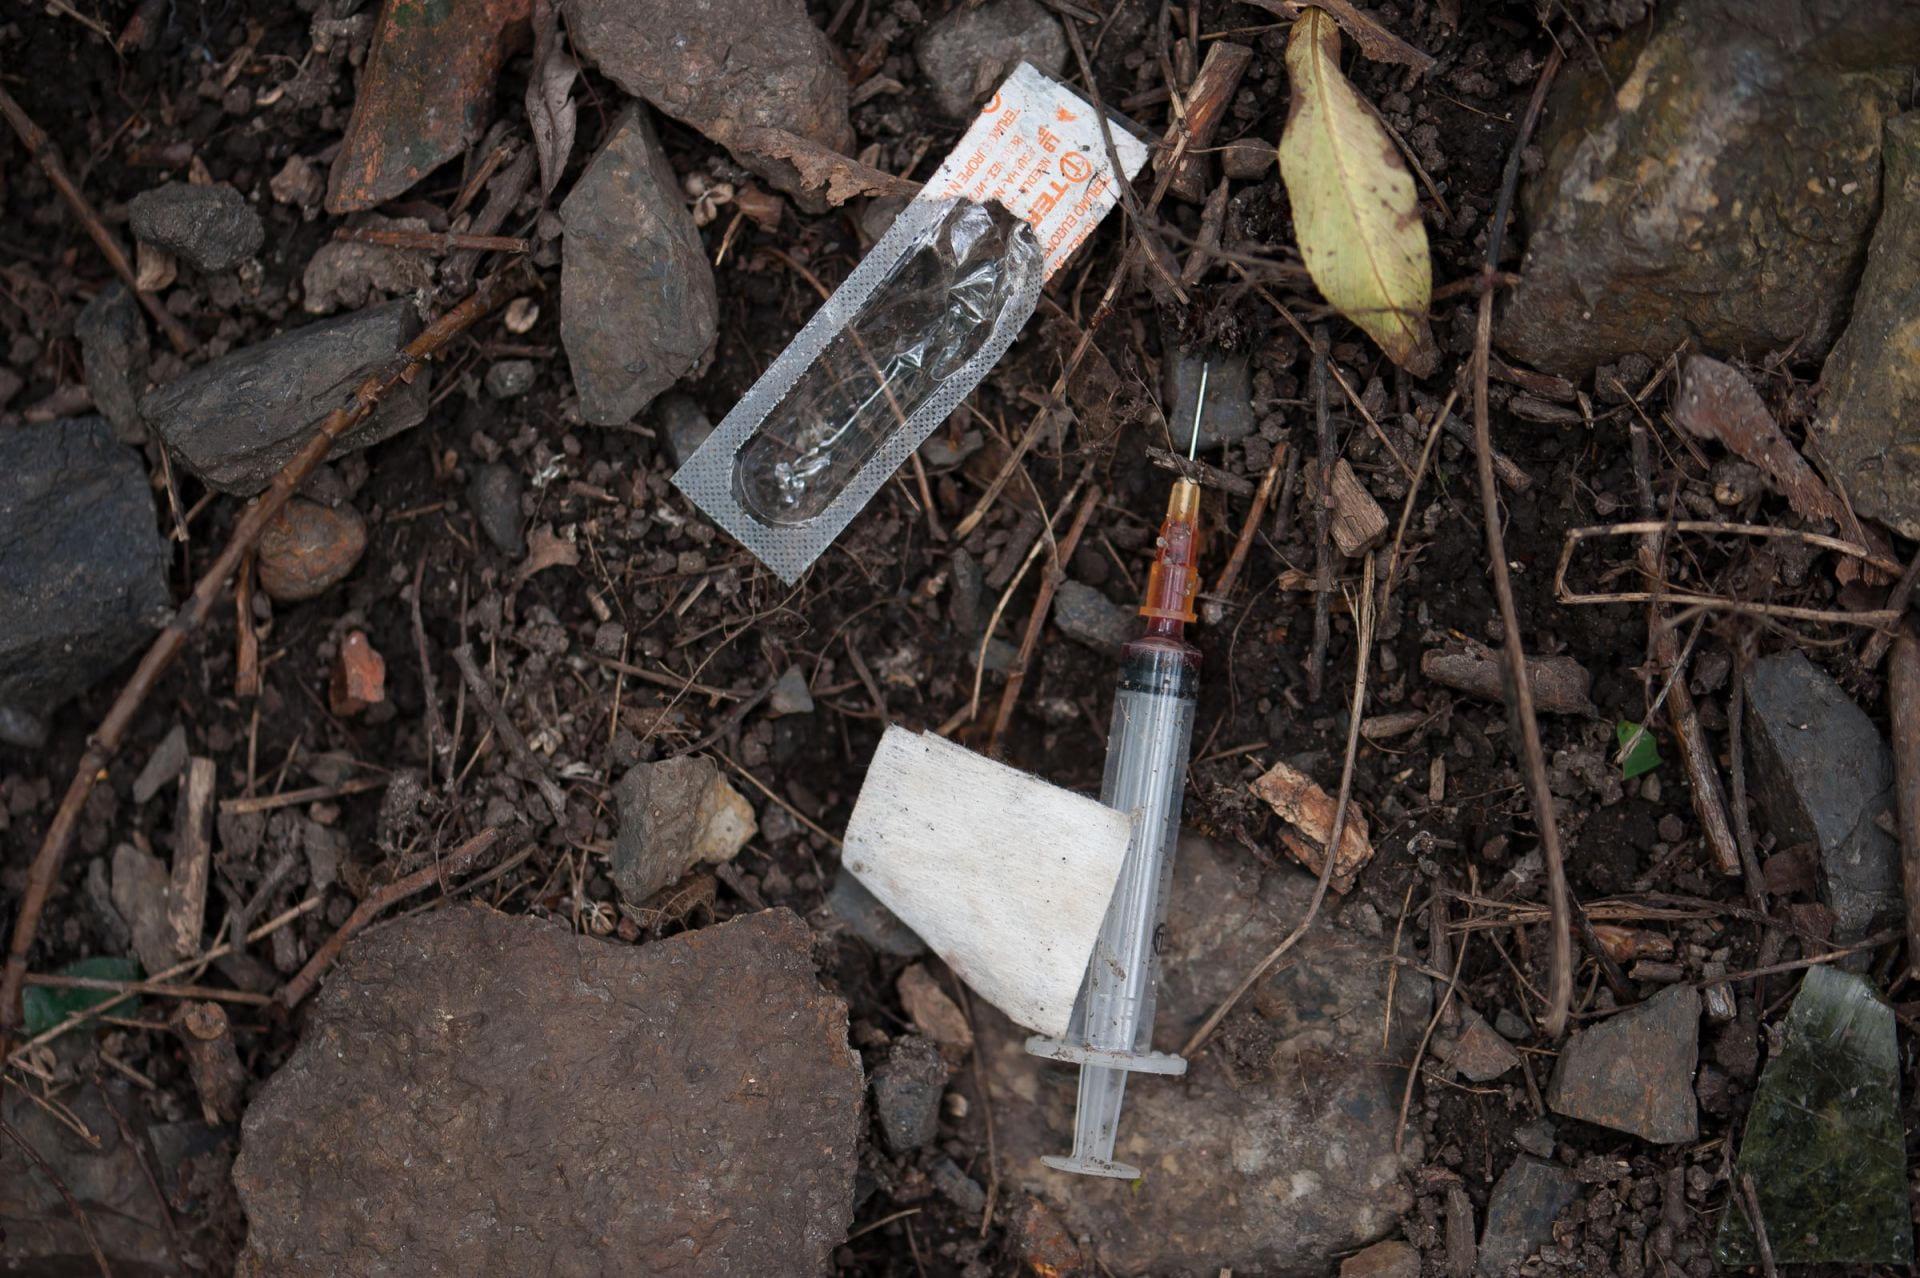 A used syringe in a forest